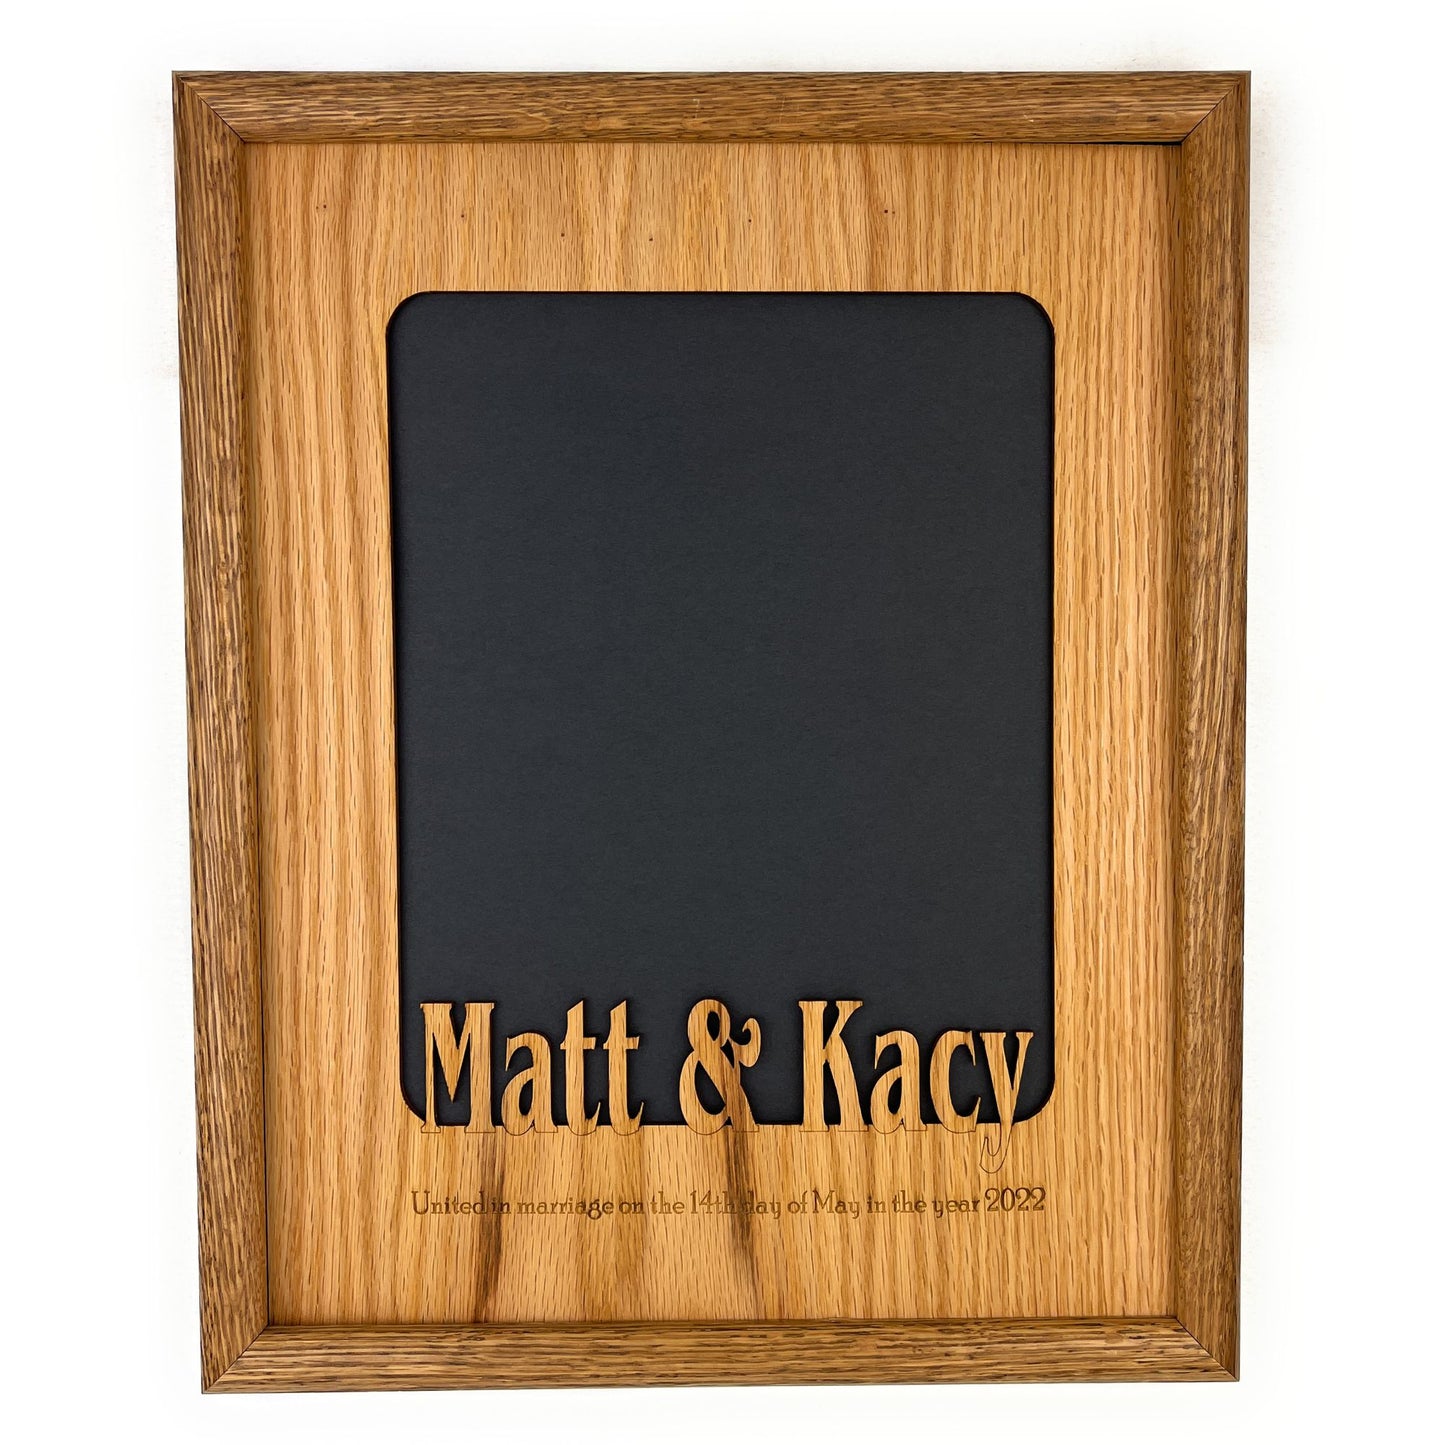 United In Marriage Wedding Picture Frame